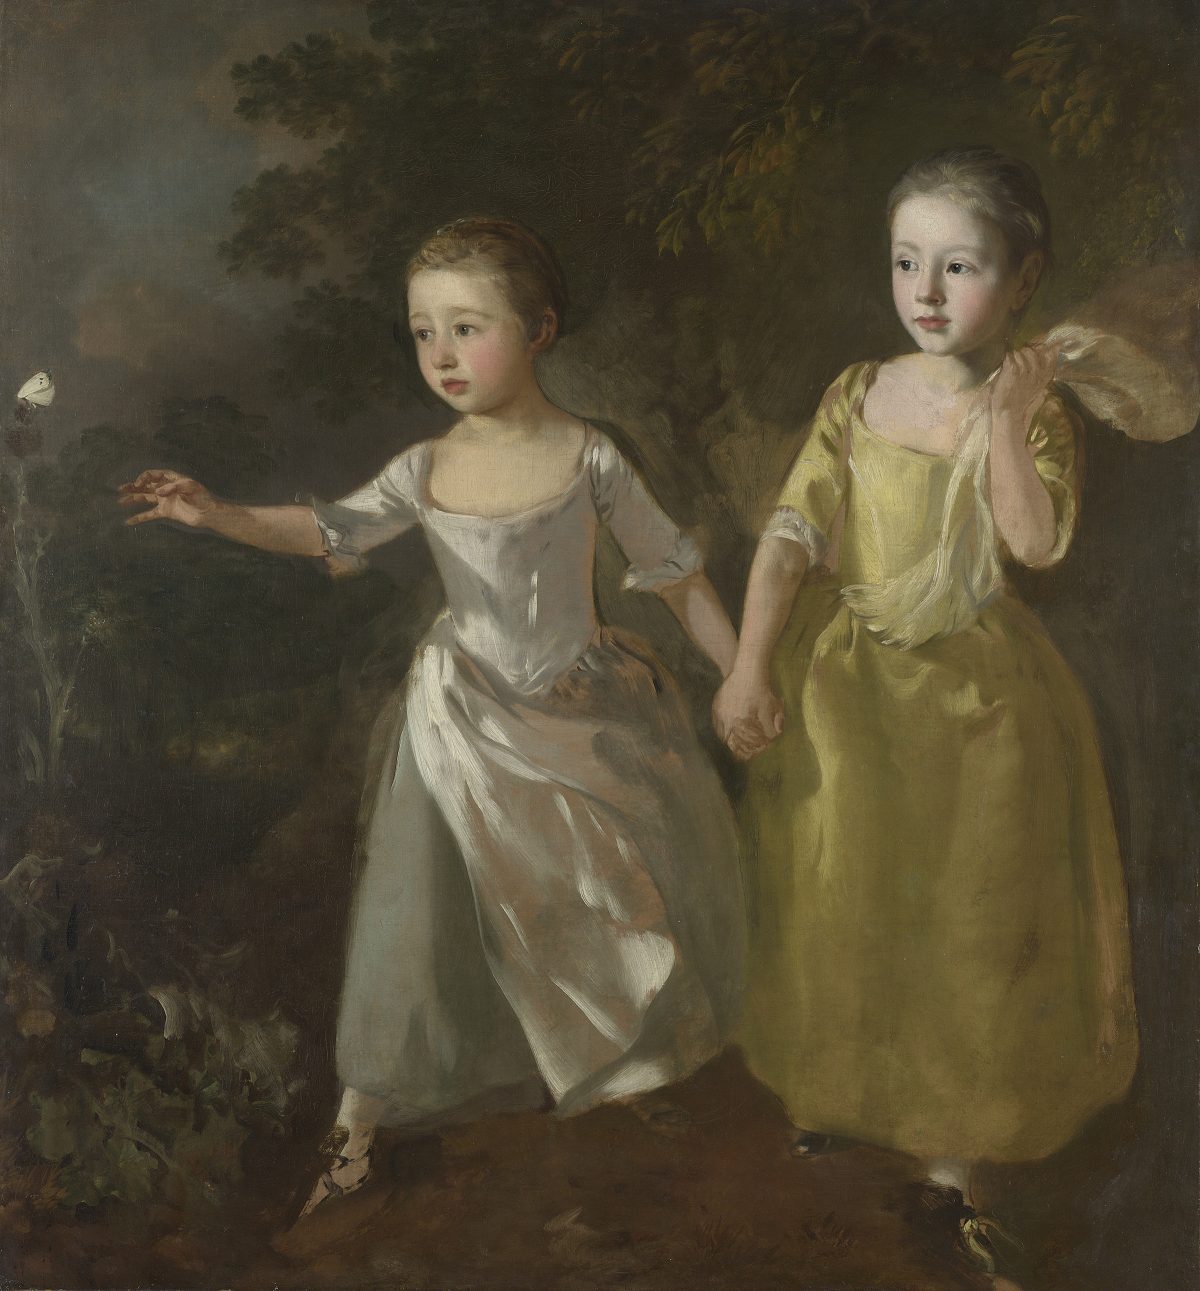 Two girls 18th century and butterfly